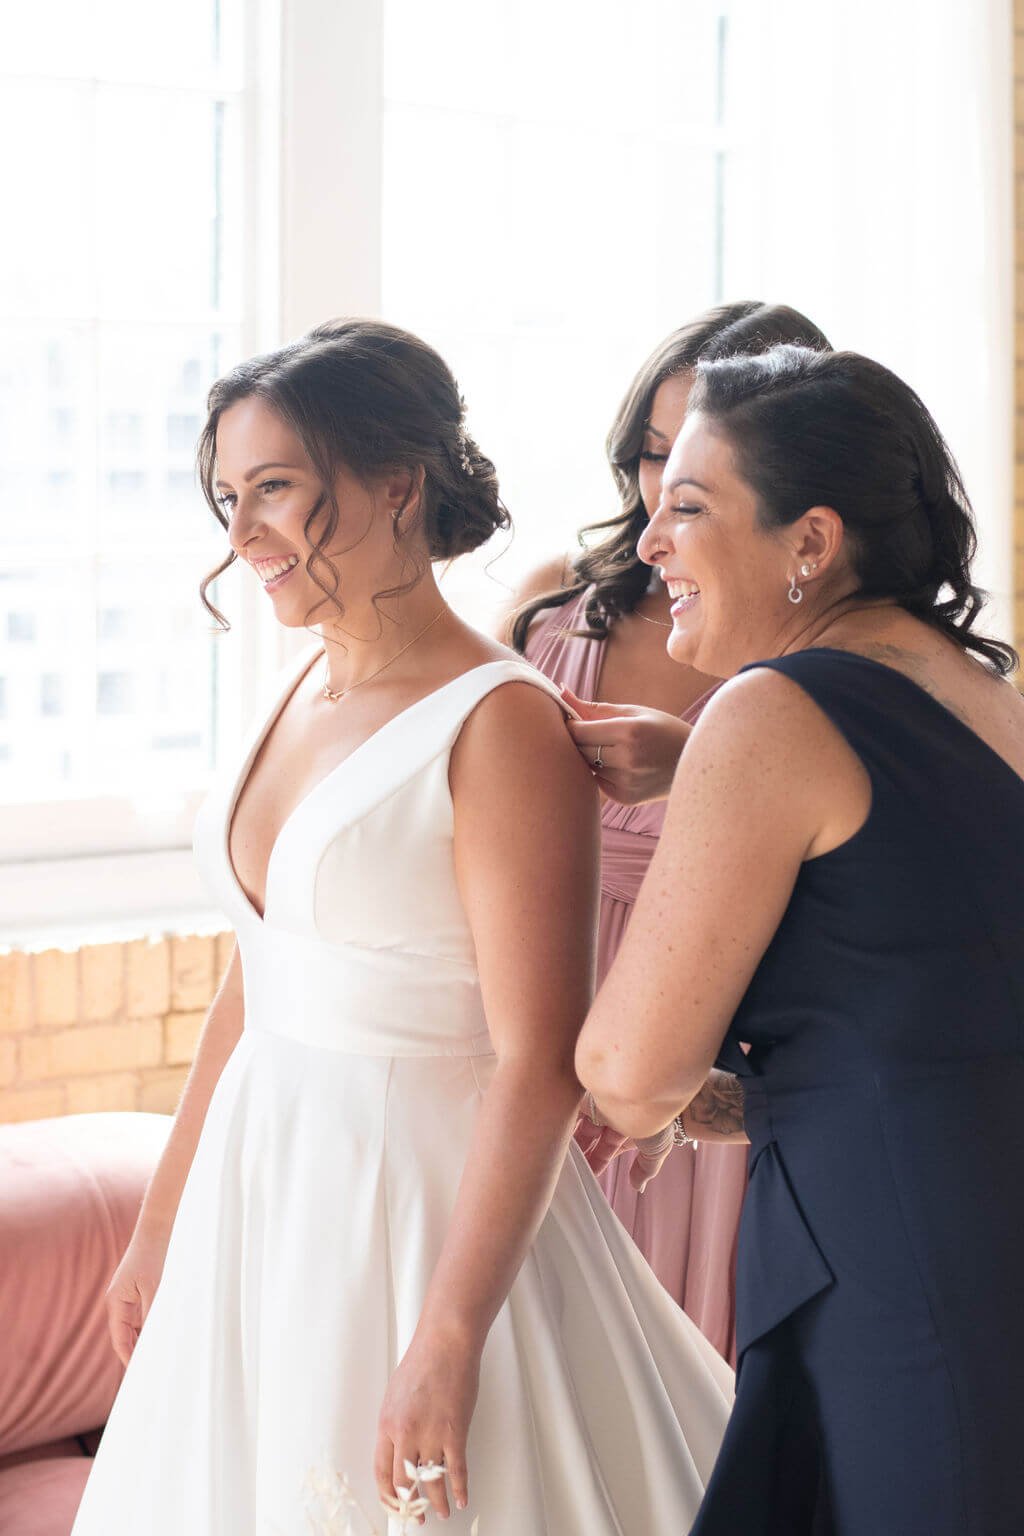 Bride's timeless wedding day photographs by Toronto wedding photographers, Ugo Photography